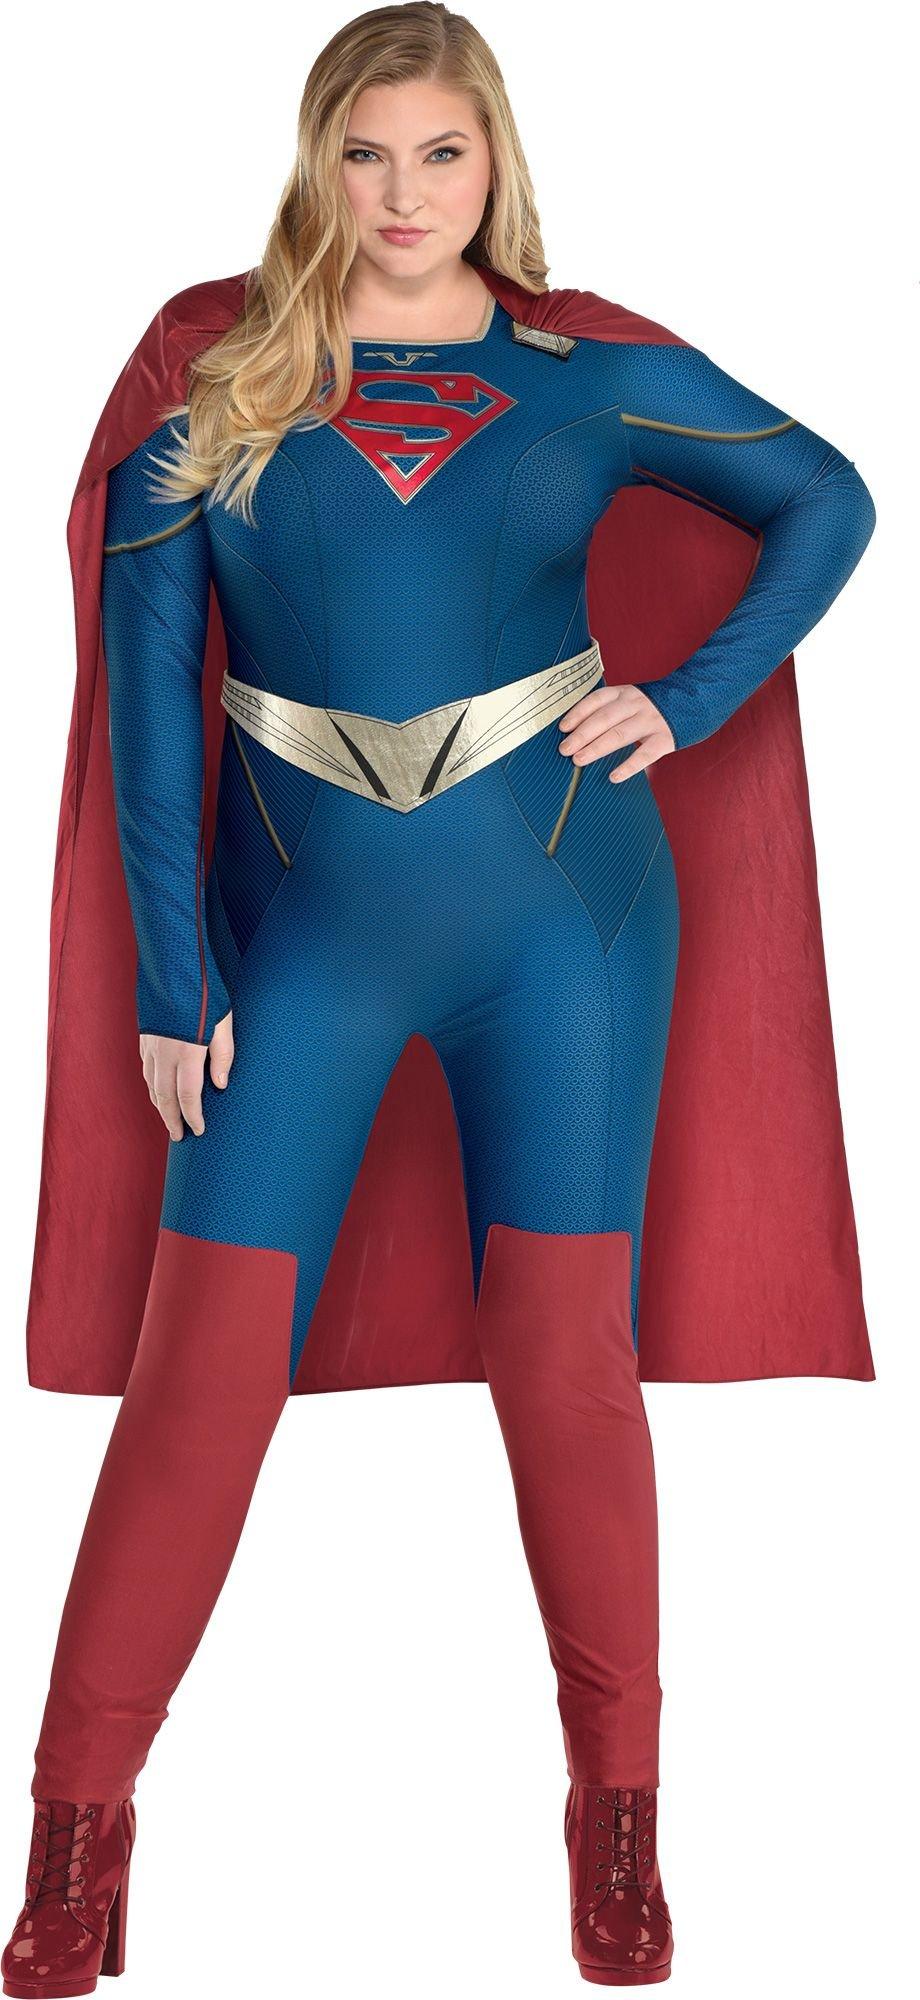 Adult Supergirl Costume Plus Size | Party